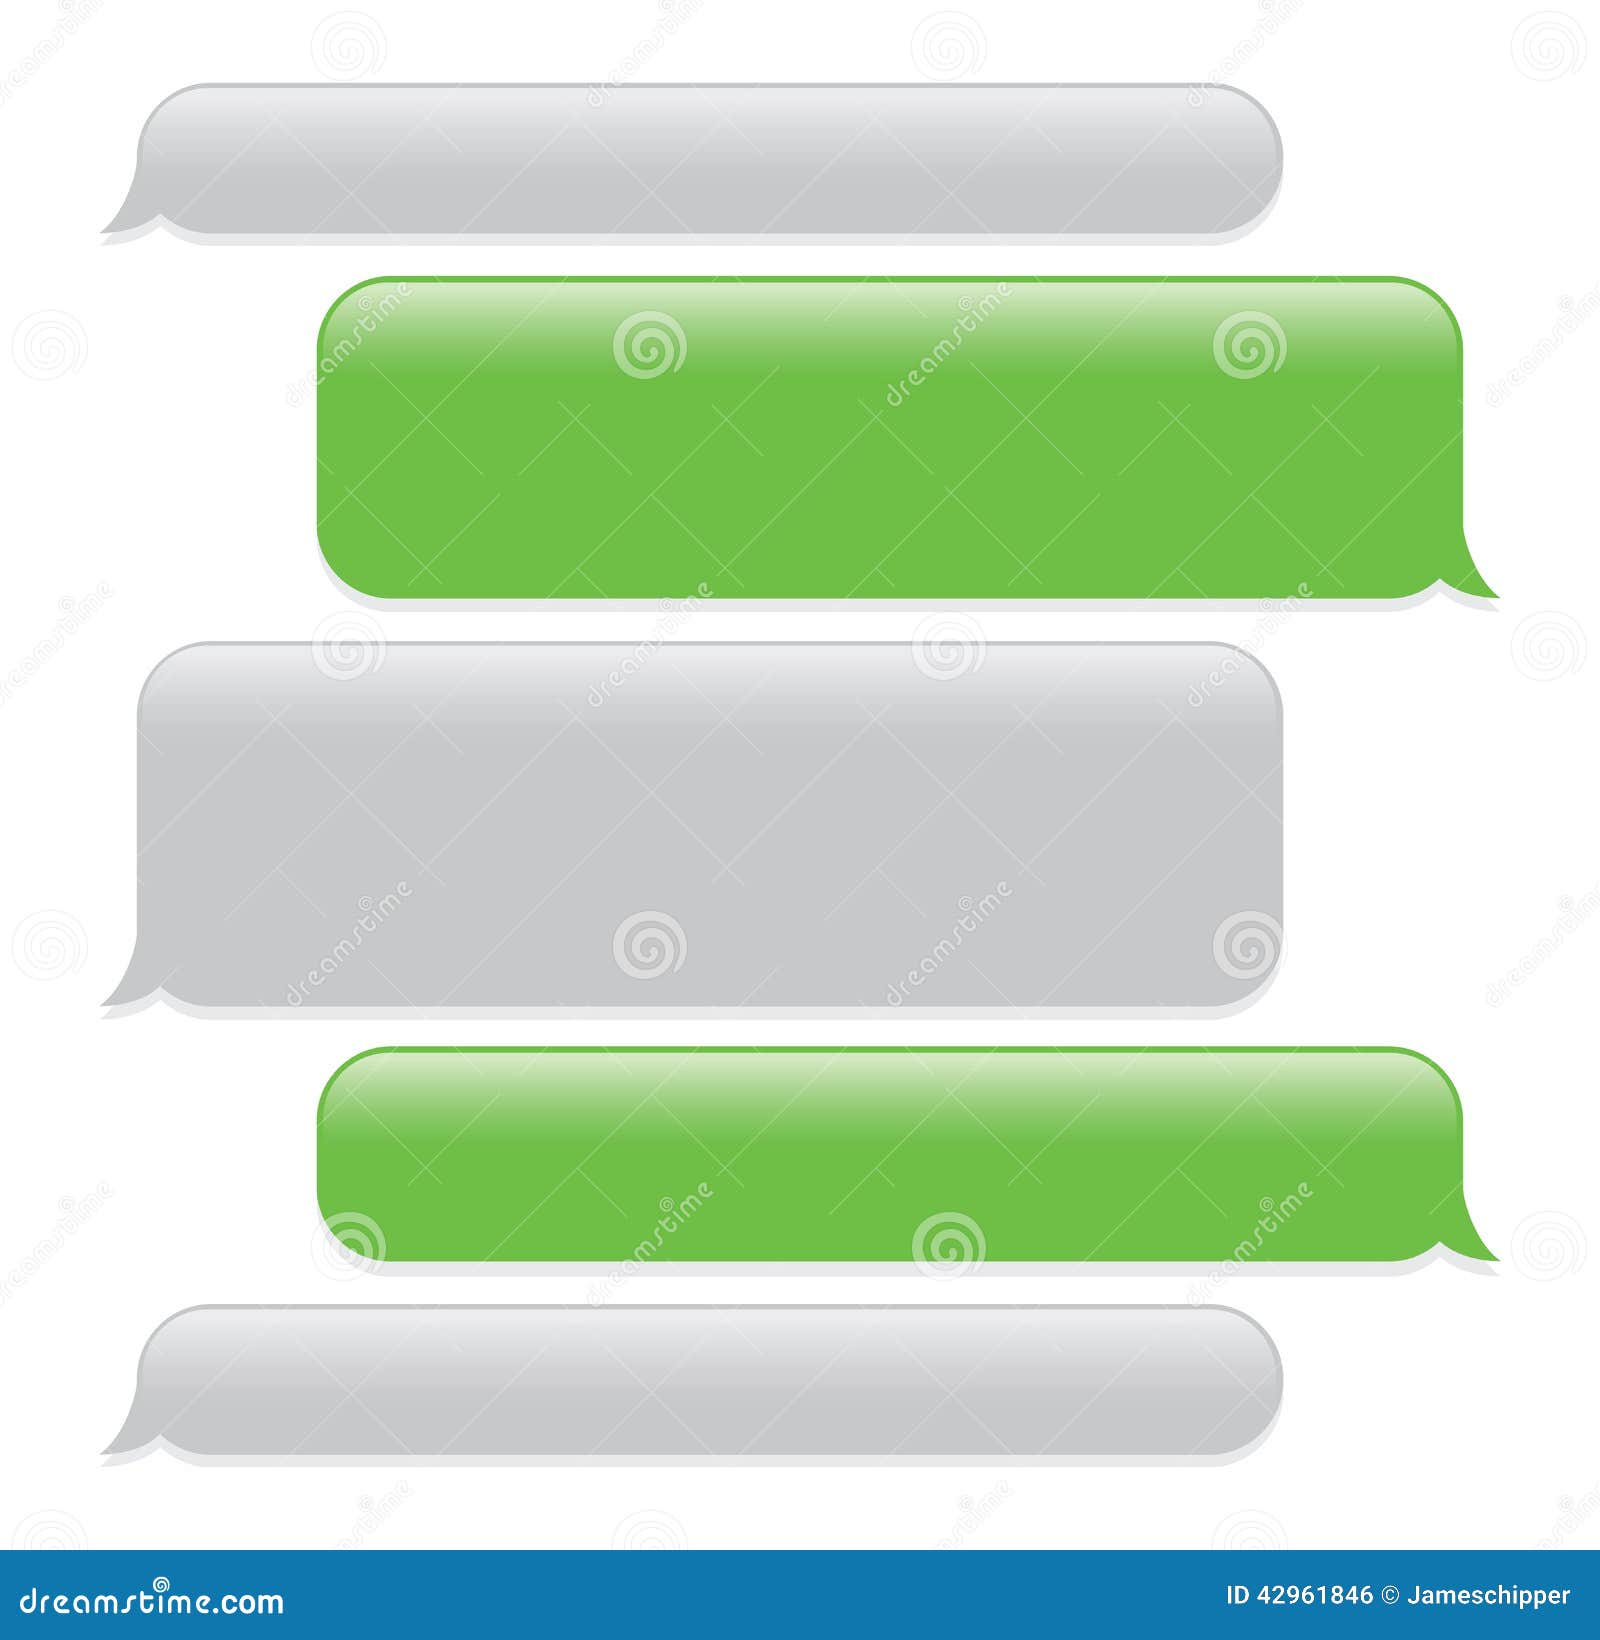 mobile phone text clipart - photo #34